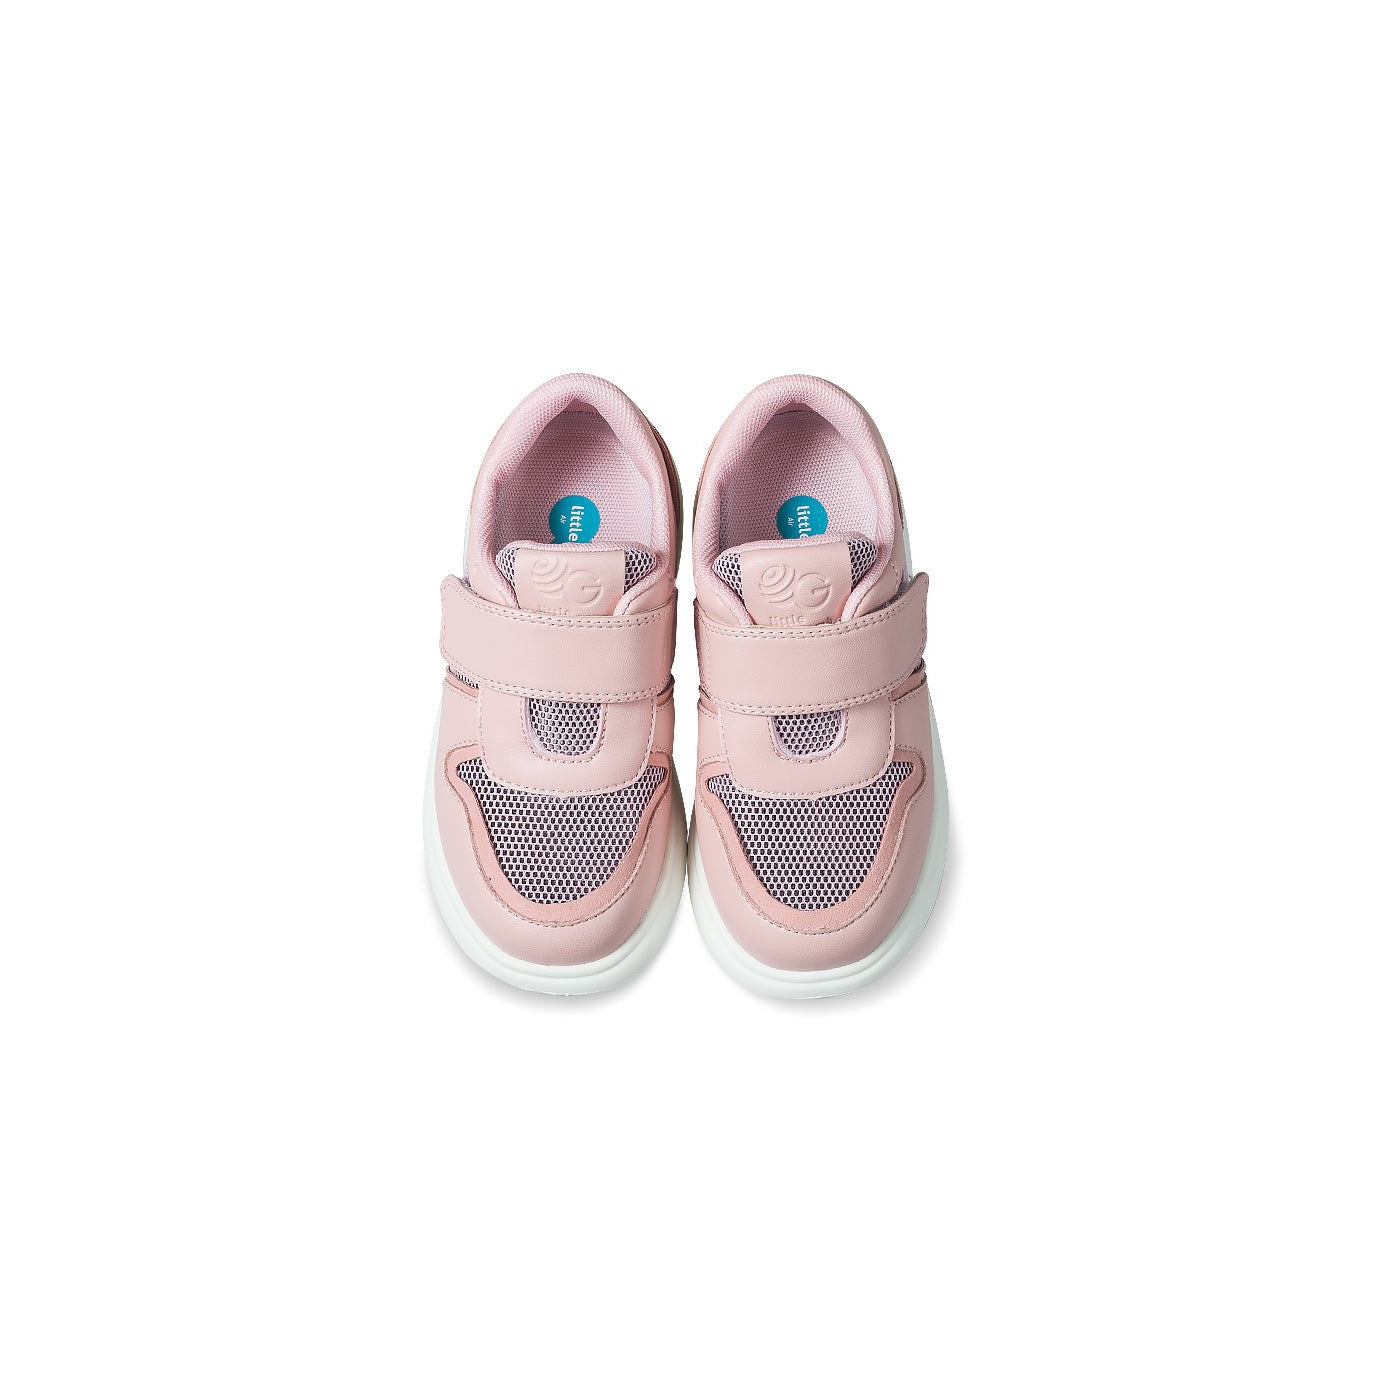 OSLO Extra Lightweight Girl Pink Sneakers - 0cm